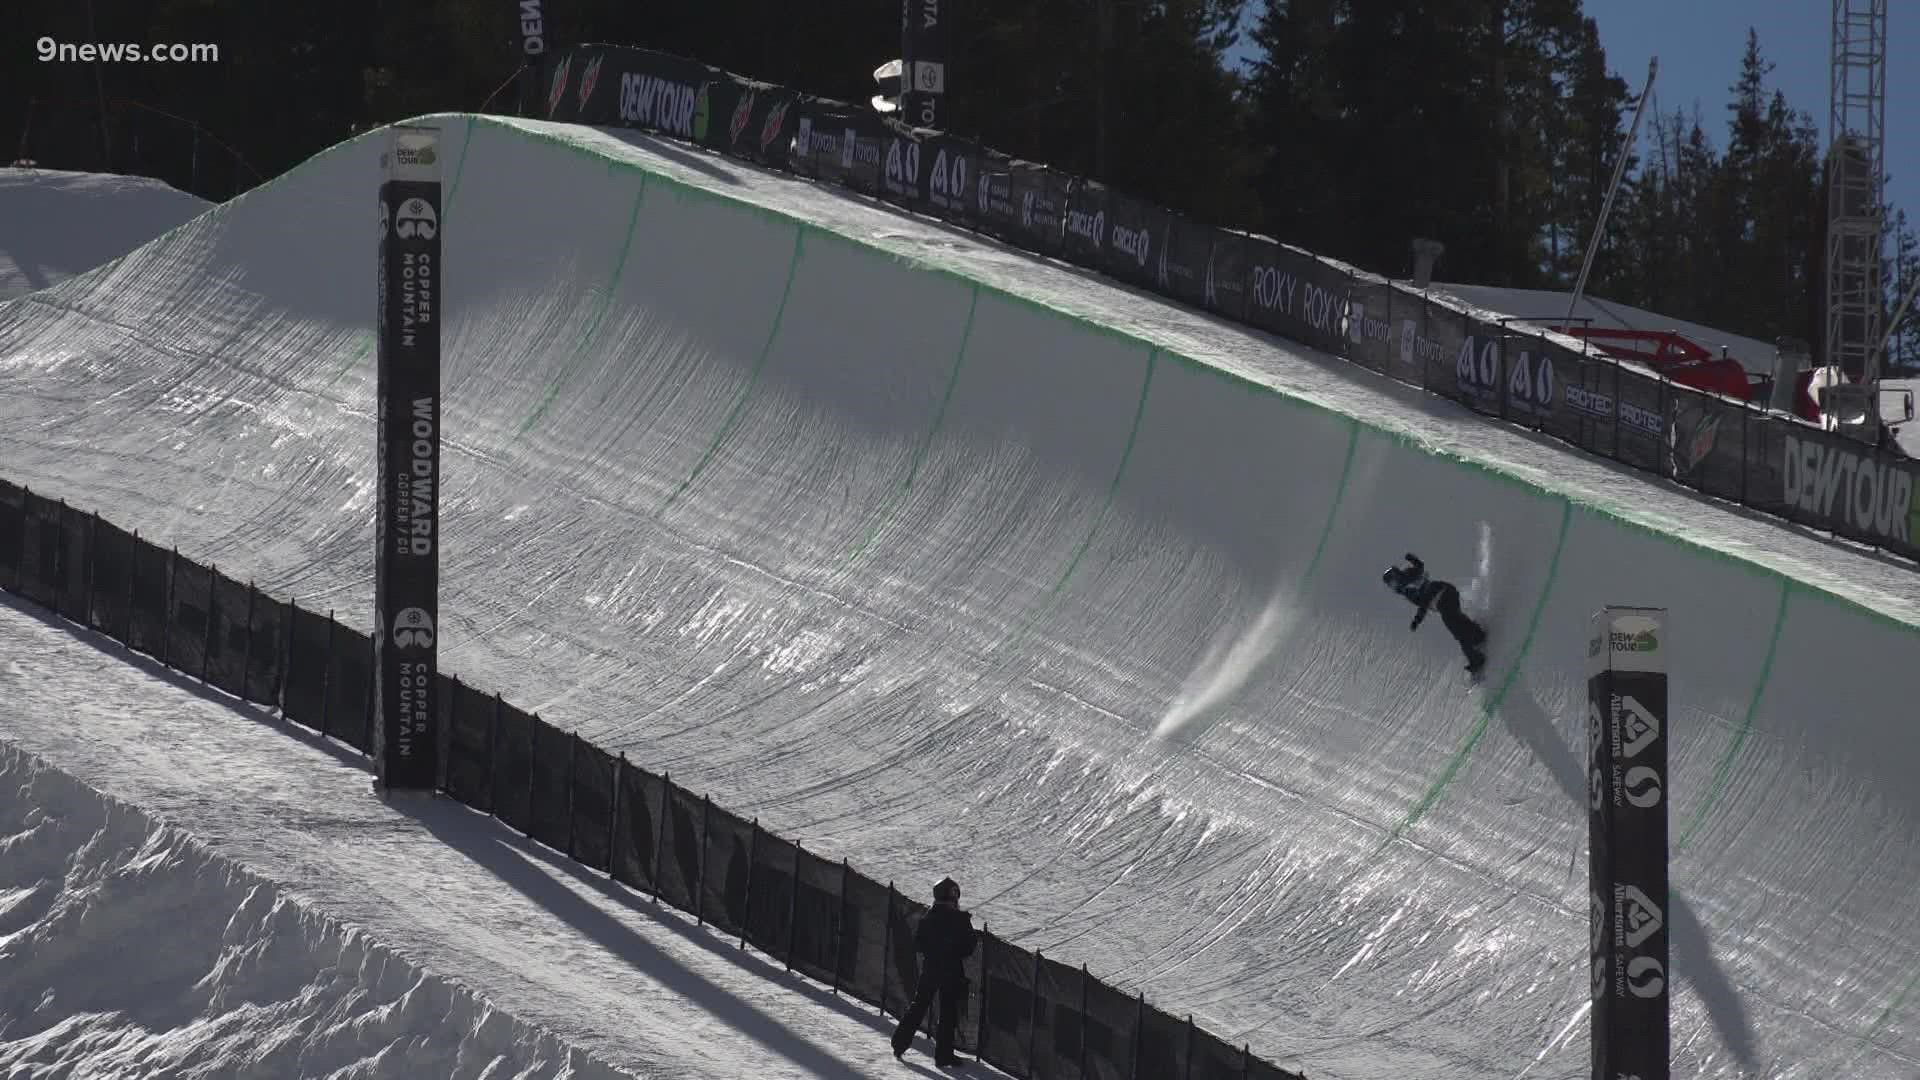 The Dew Tour, happening Dec. 16-19, brings skiers and snowboarders from all over the world to Copper Mountain to compete in halfpipe and slopestyle.